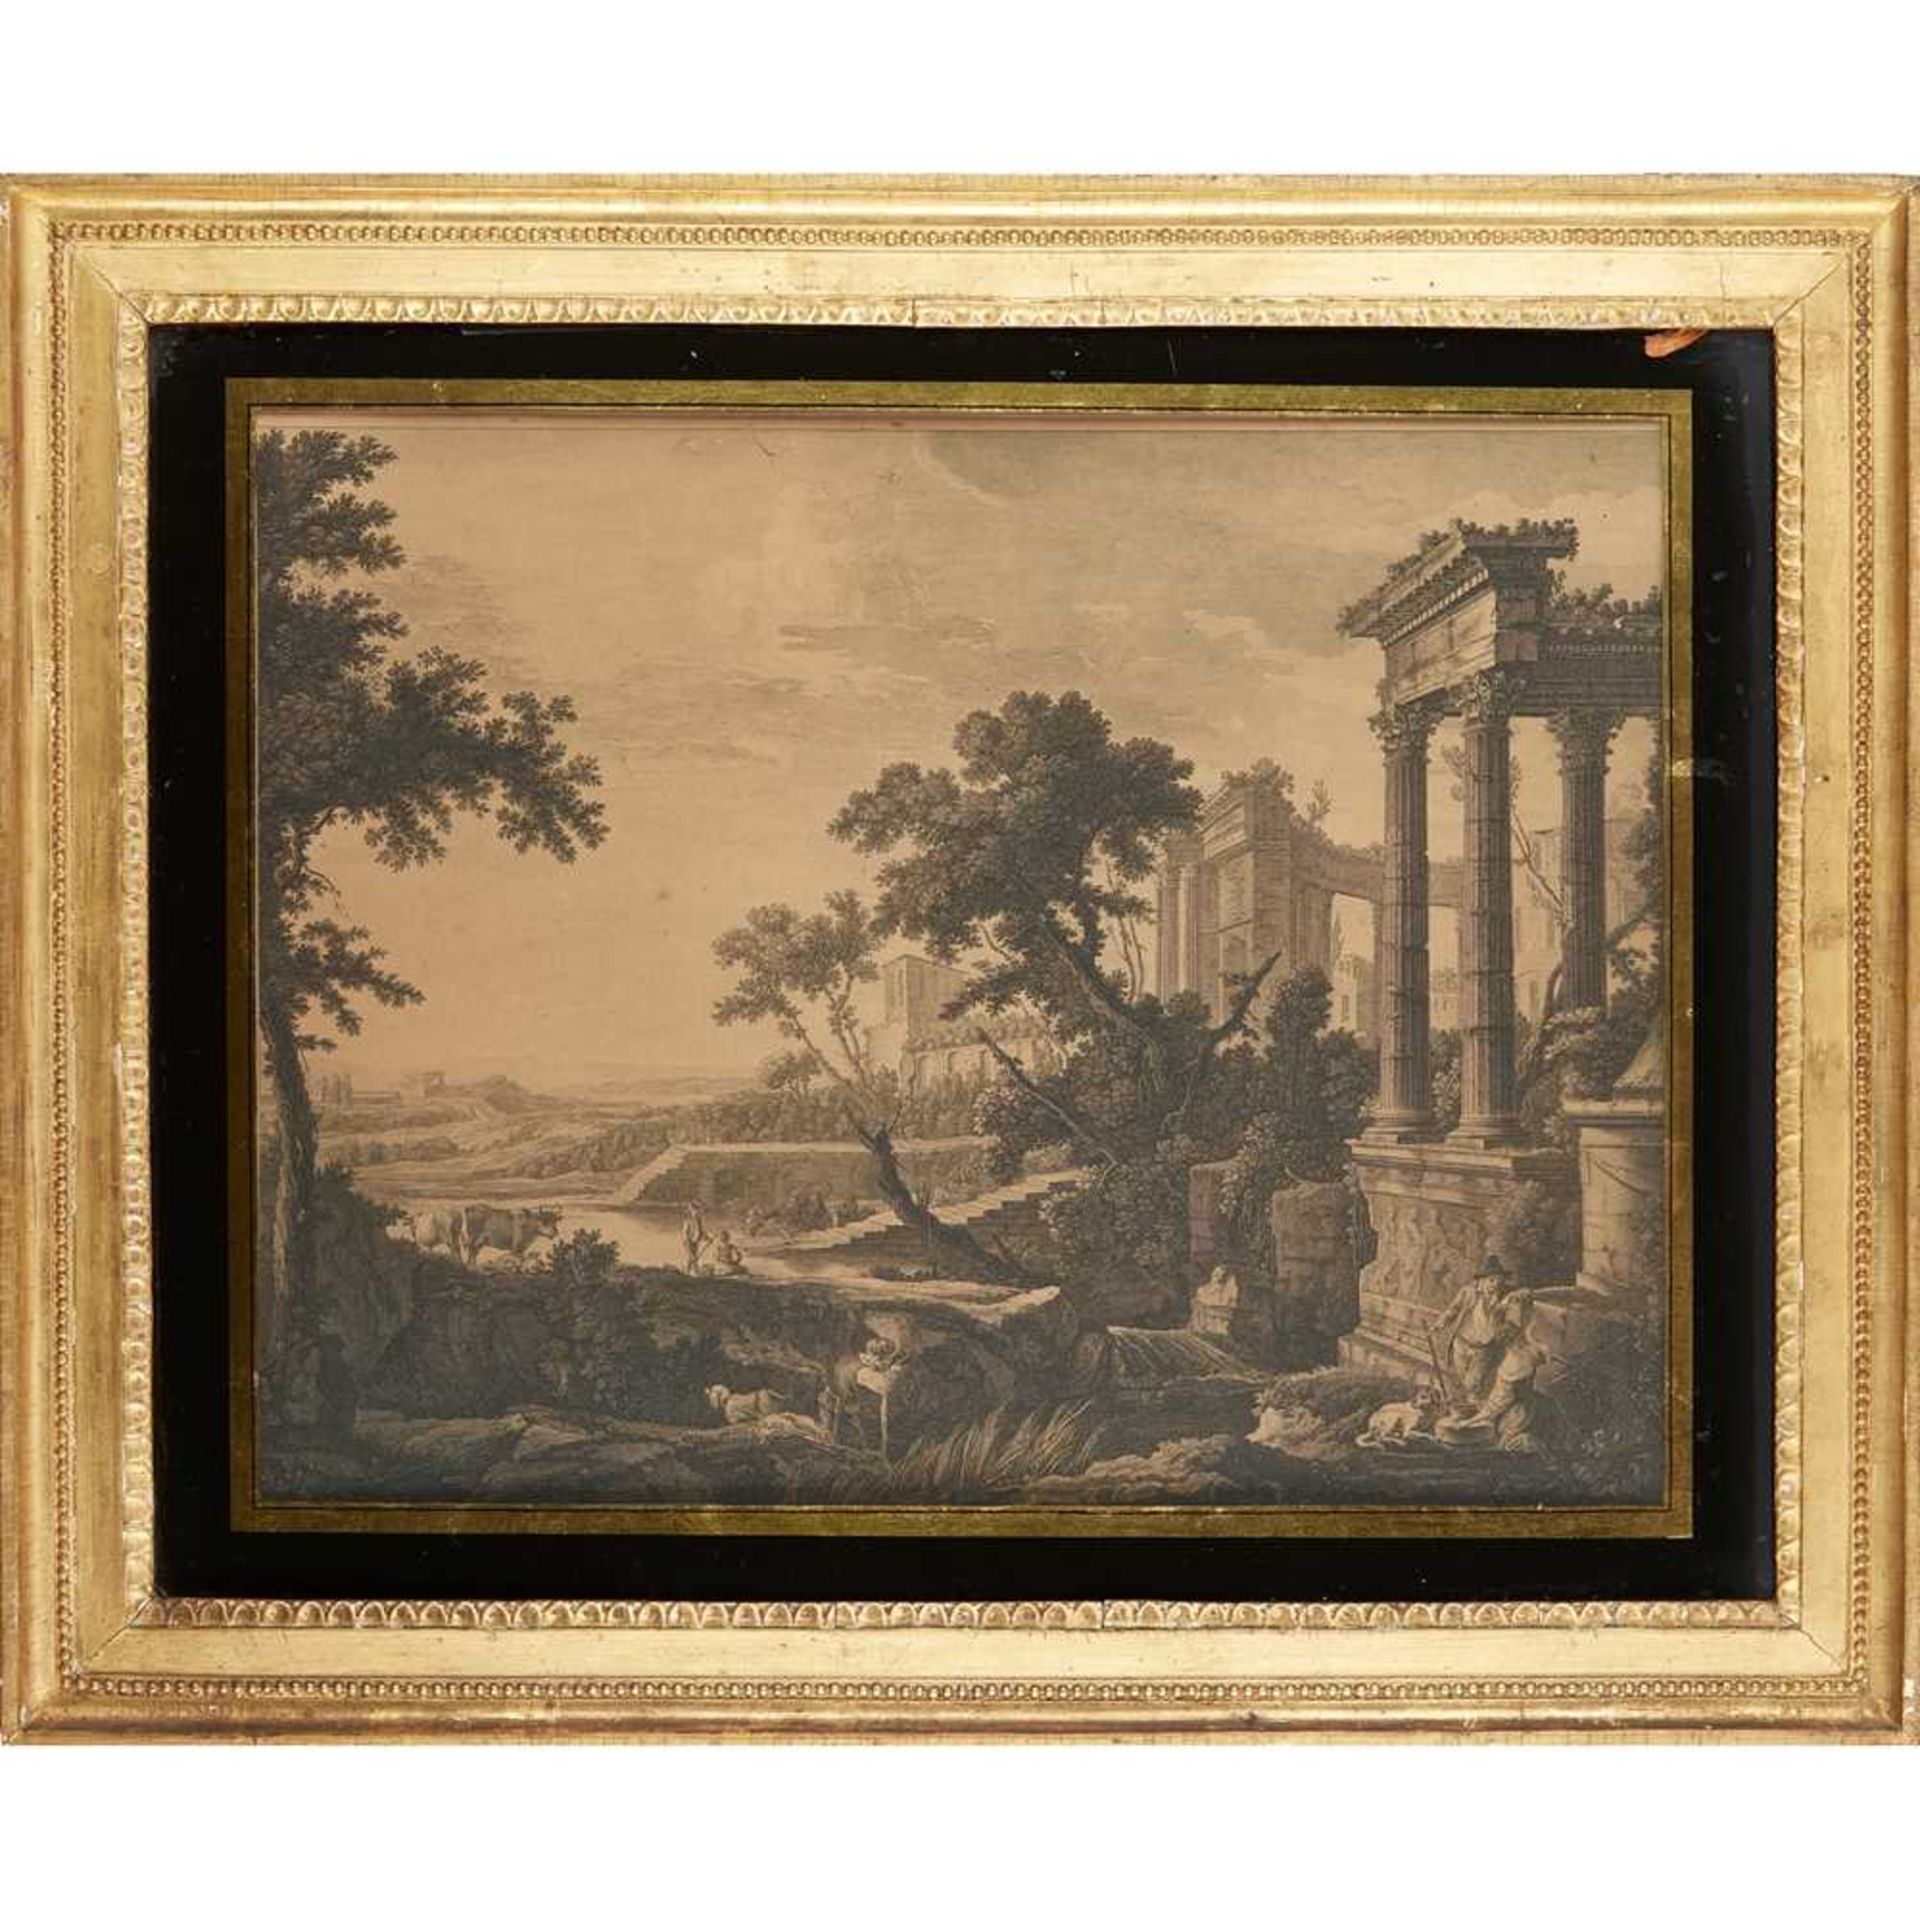 A PAIR OF LANDSCAPE PRINTS 18TH CENTURY - Image 5 of 12